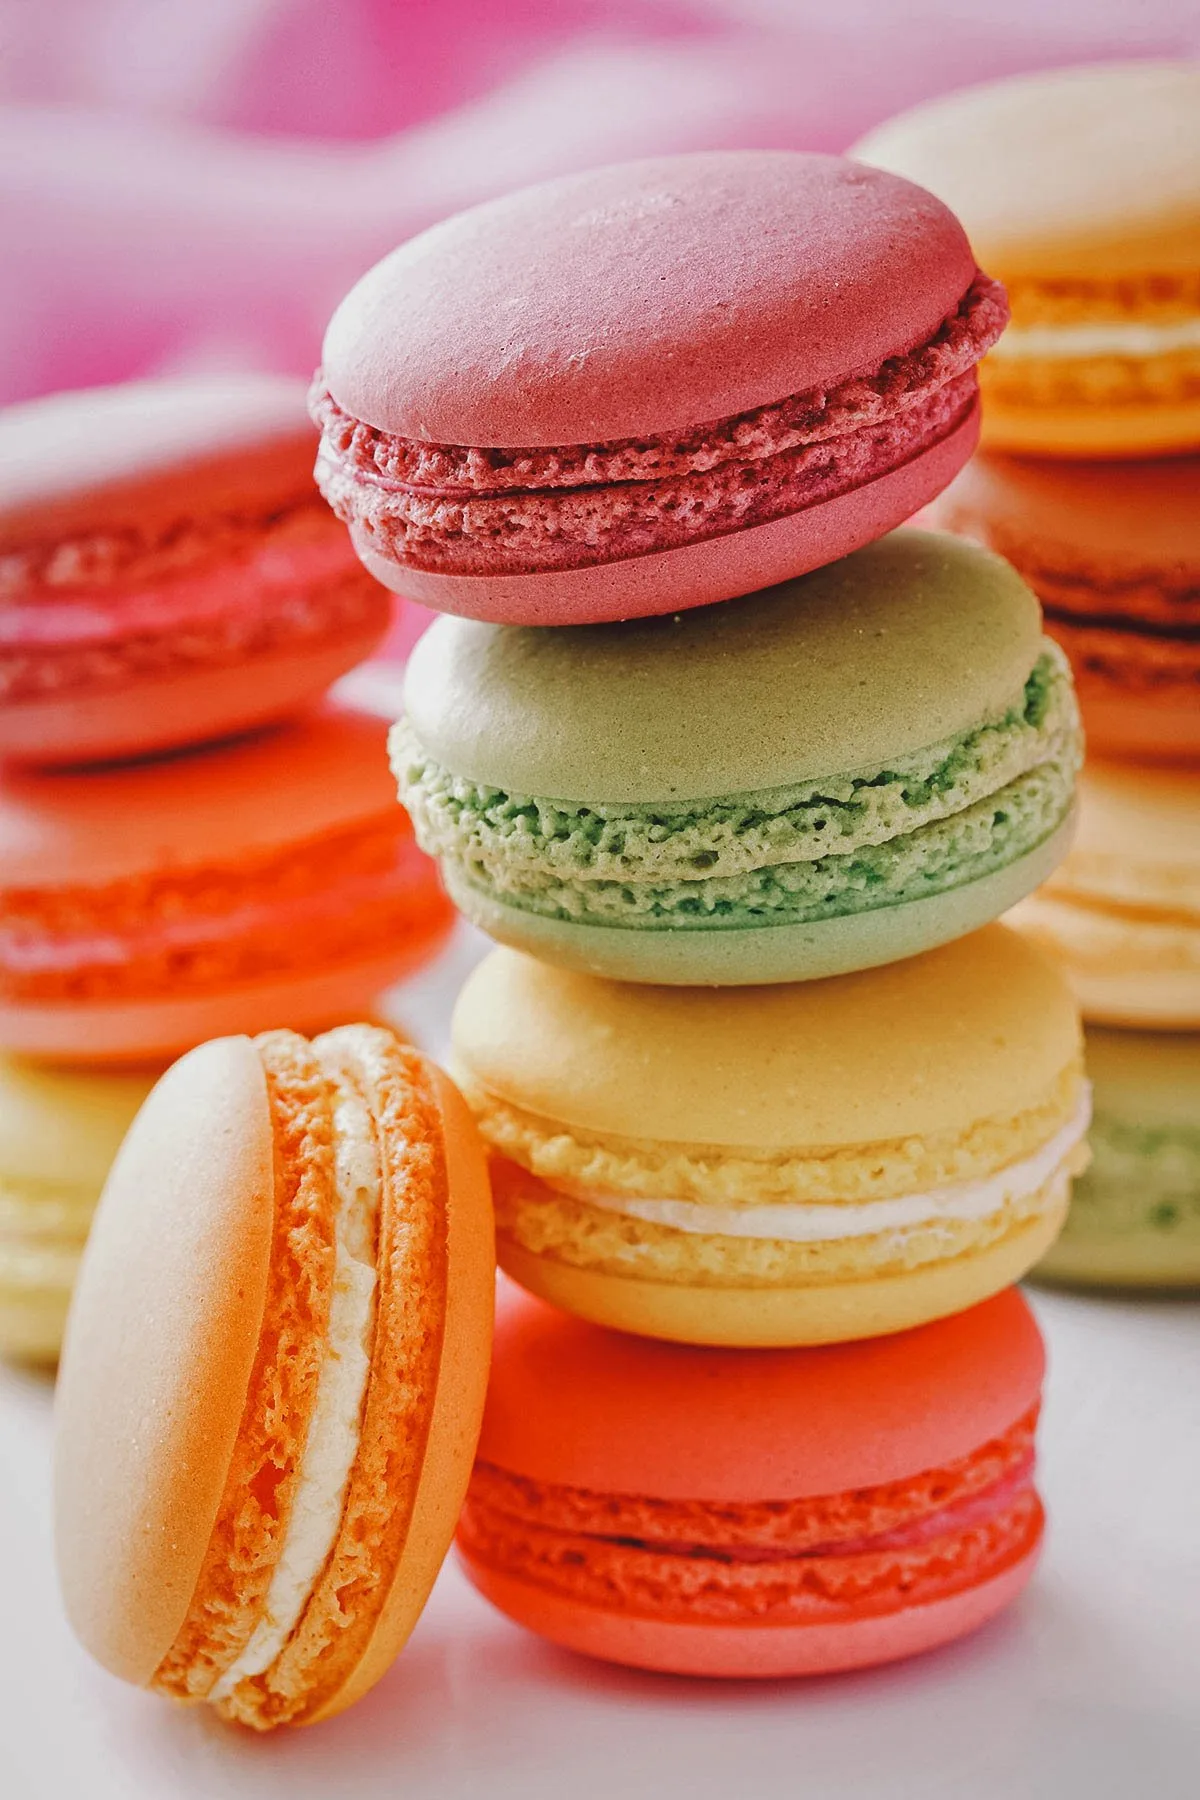 French macaron cookie sandwiches